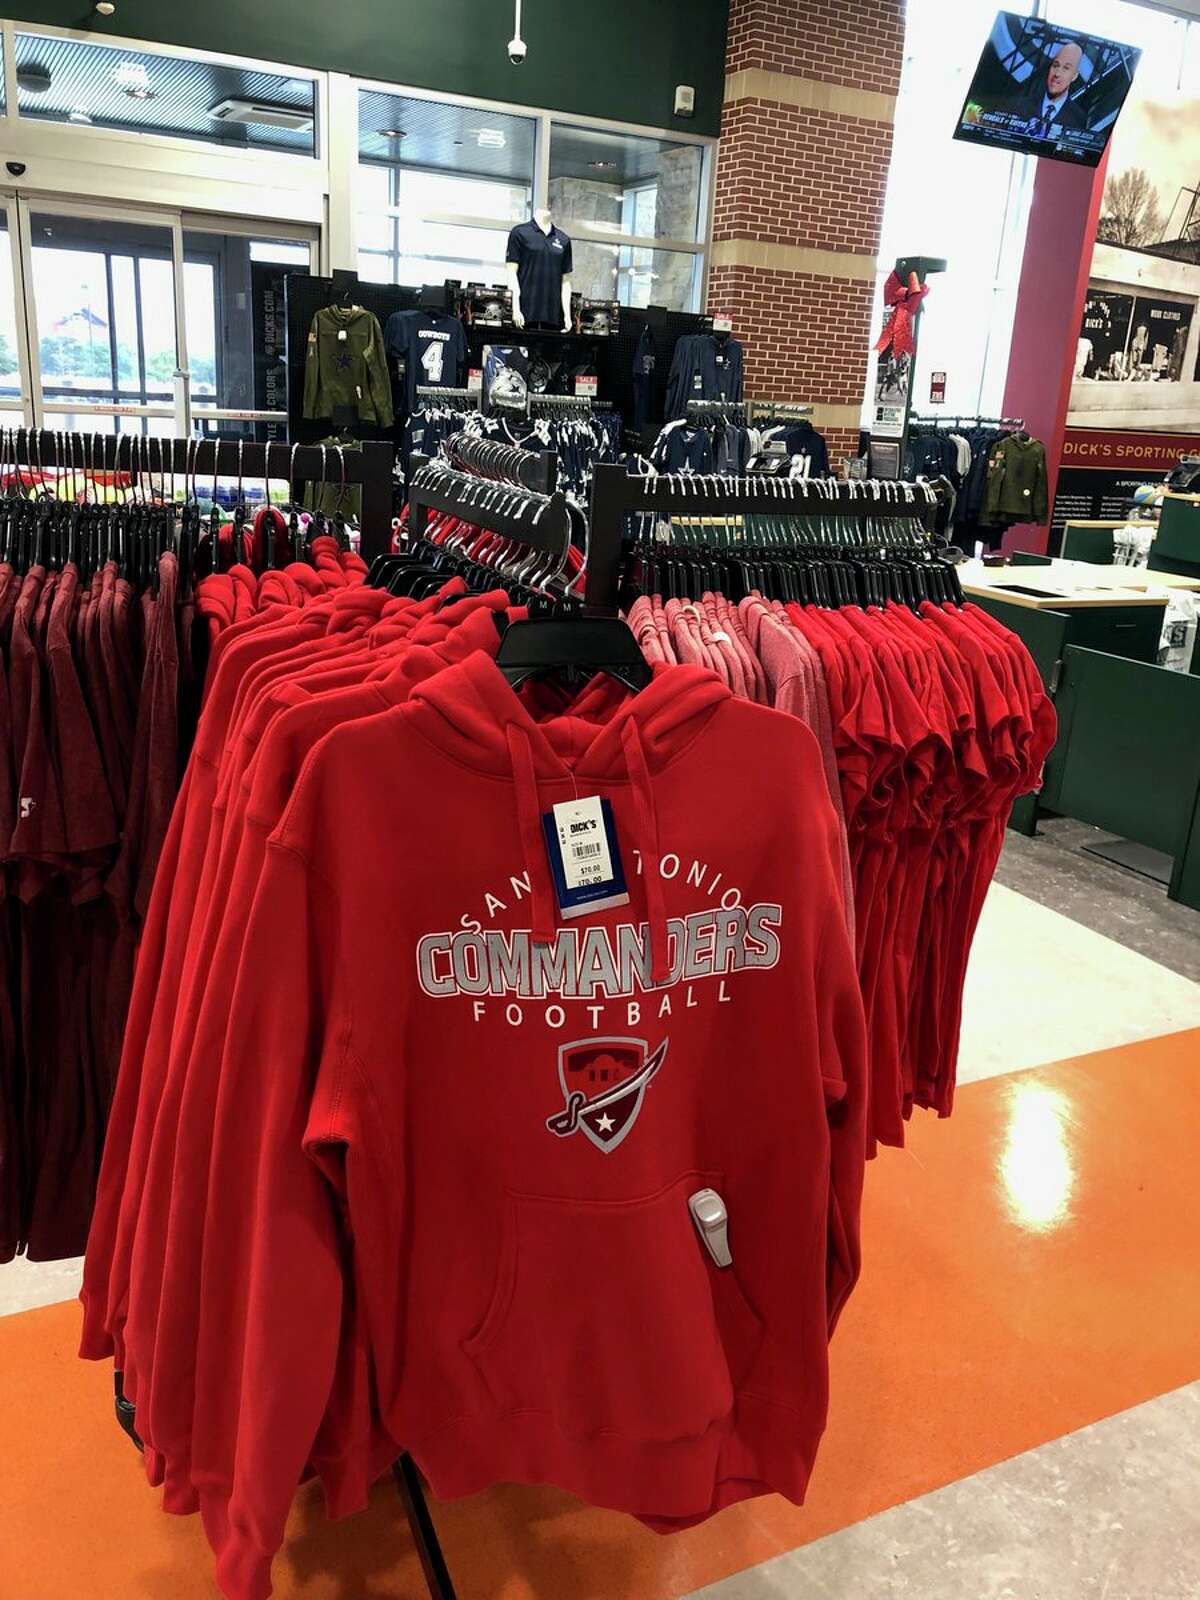 The San Antonio Commanders, the city's new pro football team, rolled out its gear in Dick's Sporting Goods stores throughout the San Antonio area last weekend.